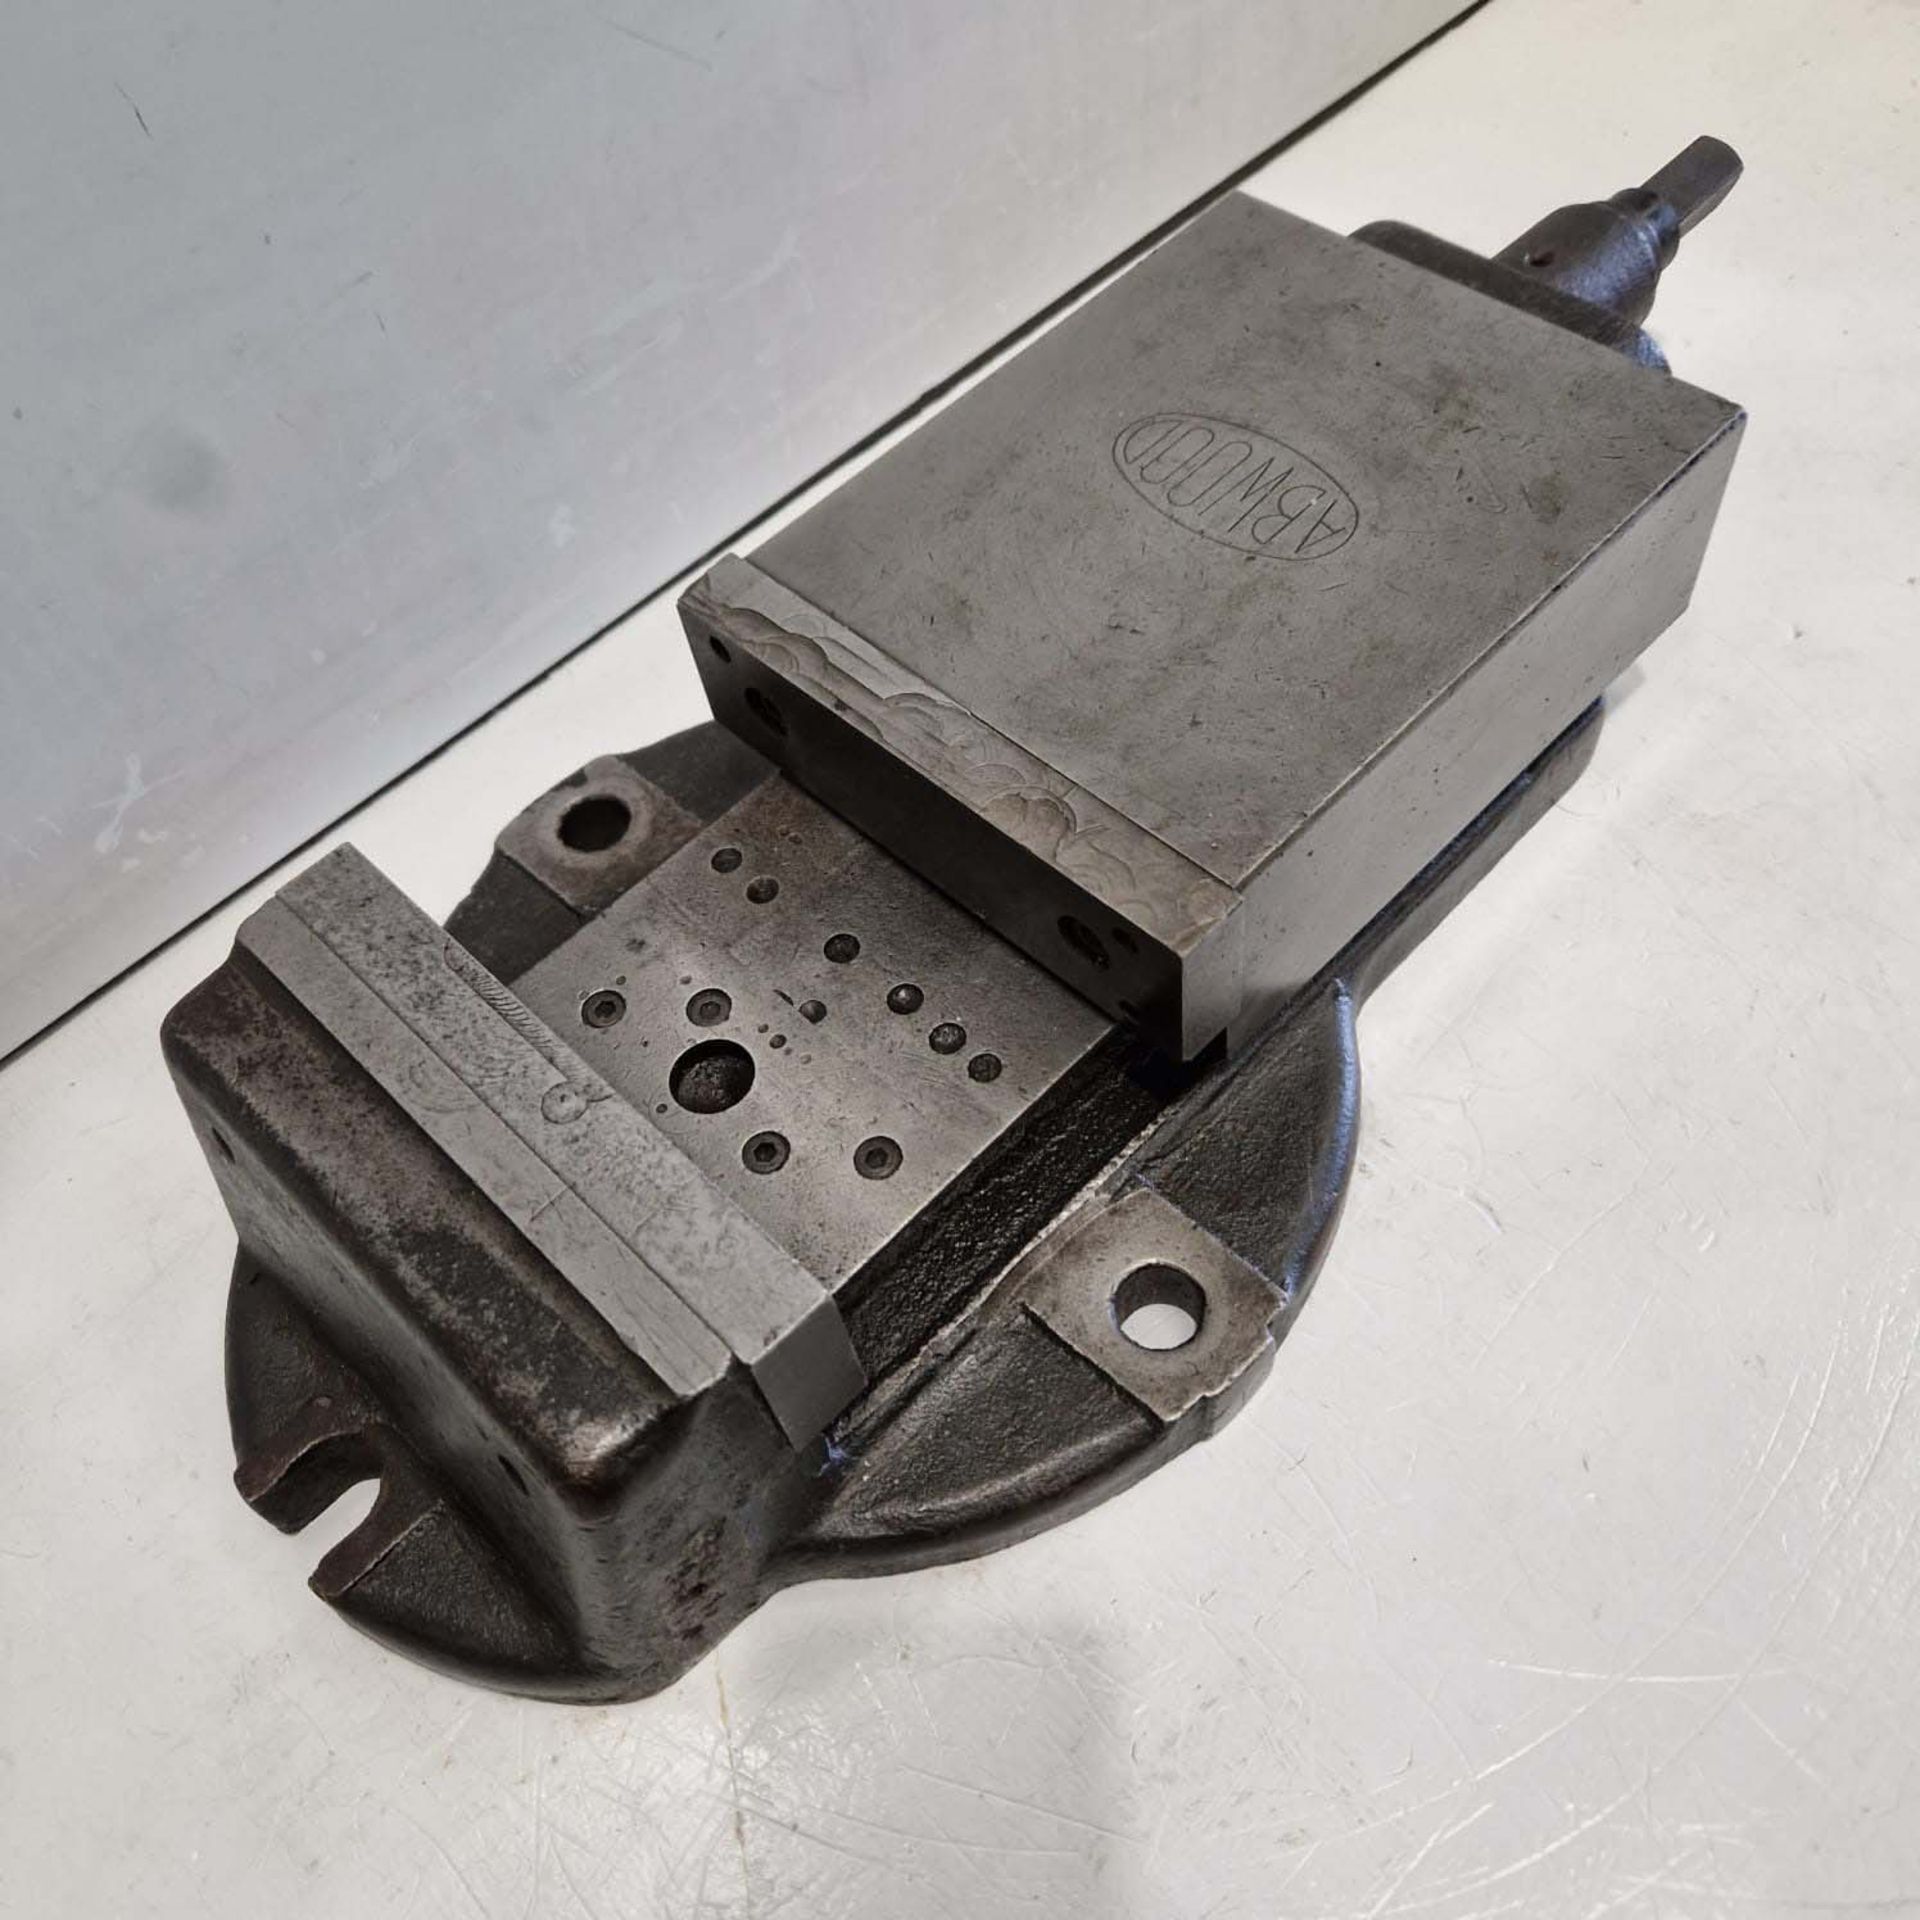 Abwood 6" Machine Vice. Width of Jaws 6 1/2". Height of Jaws 1 3/4". Max Opening of Jaws 6". - Image 2 of 6